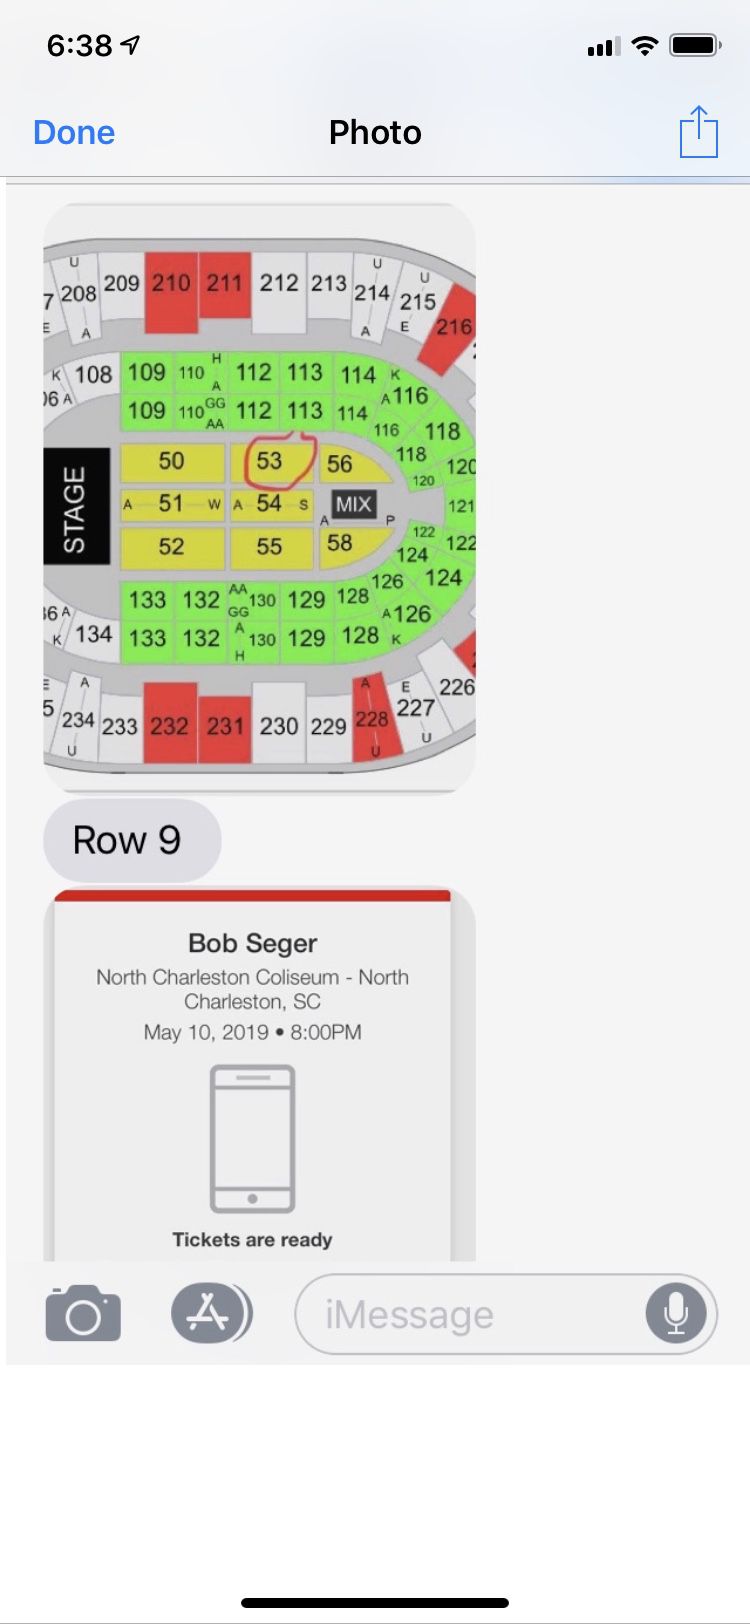 Bob Seger Ticket for the show tonight, 10 May! Great seat!